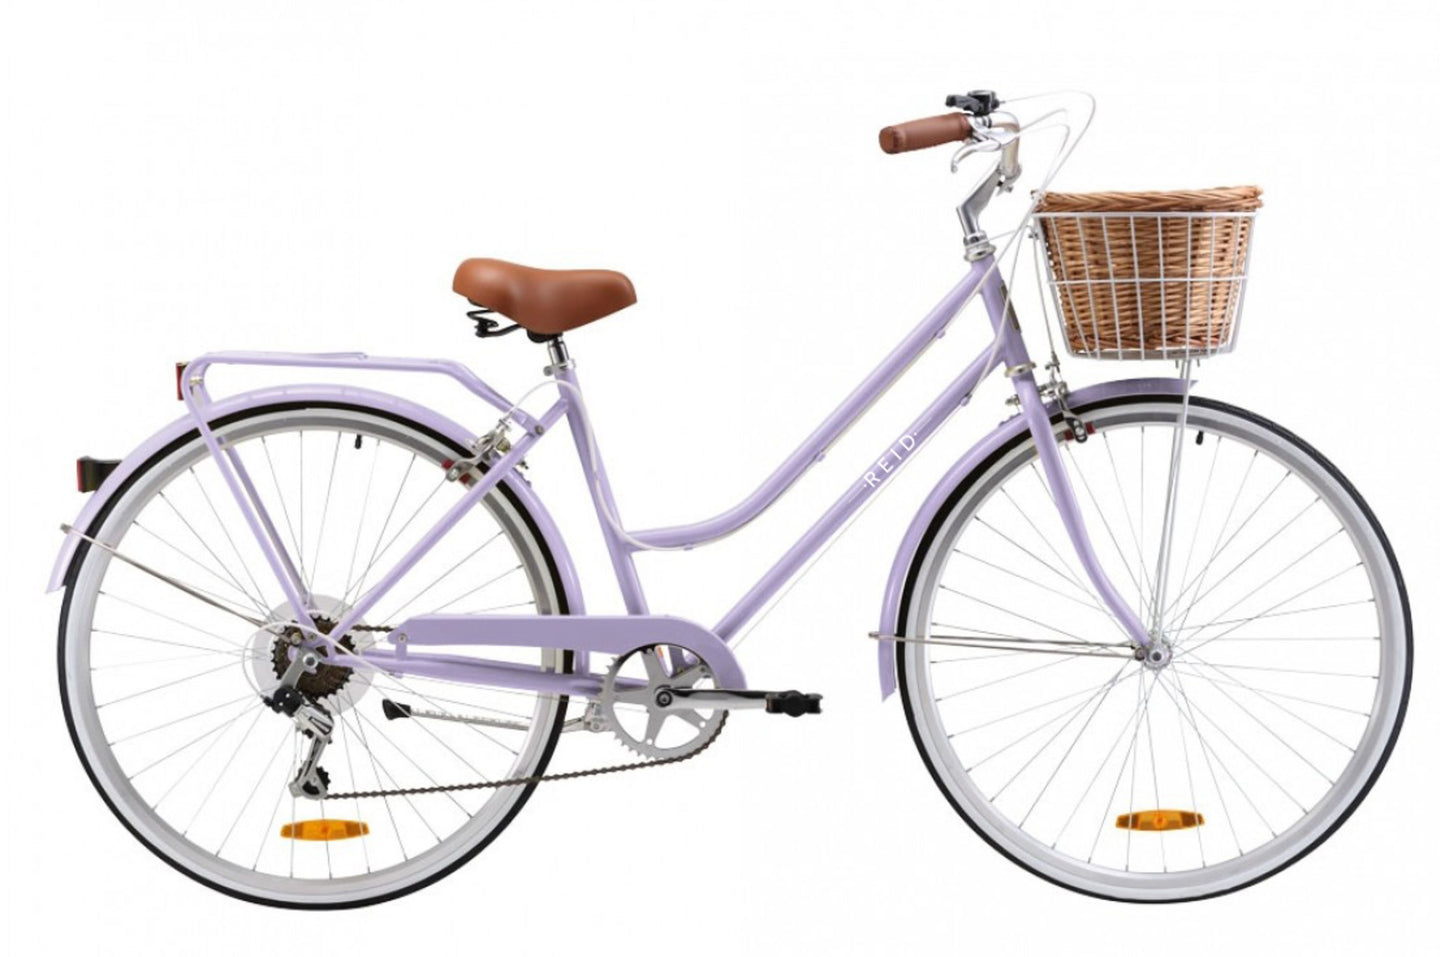 Ladies Classic Plus Vintage Bike in Lavender with 7-speed Shimano gearing from Reid Cycles Australia